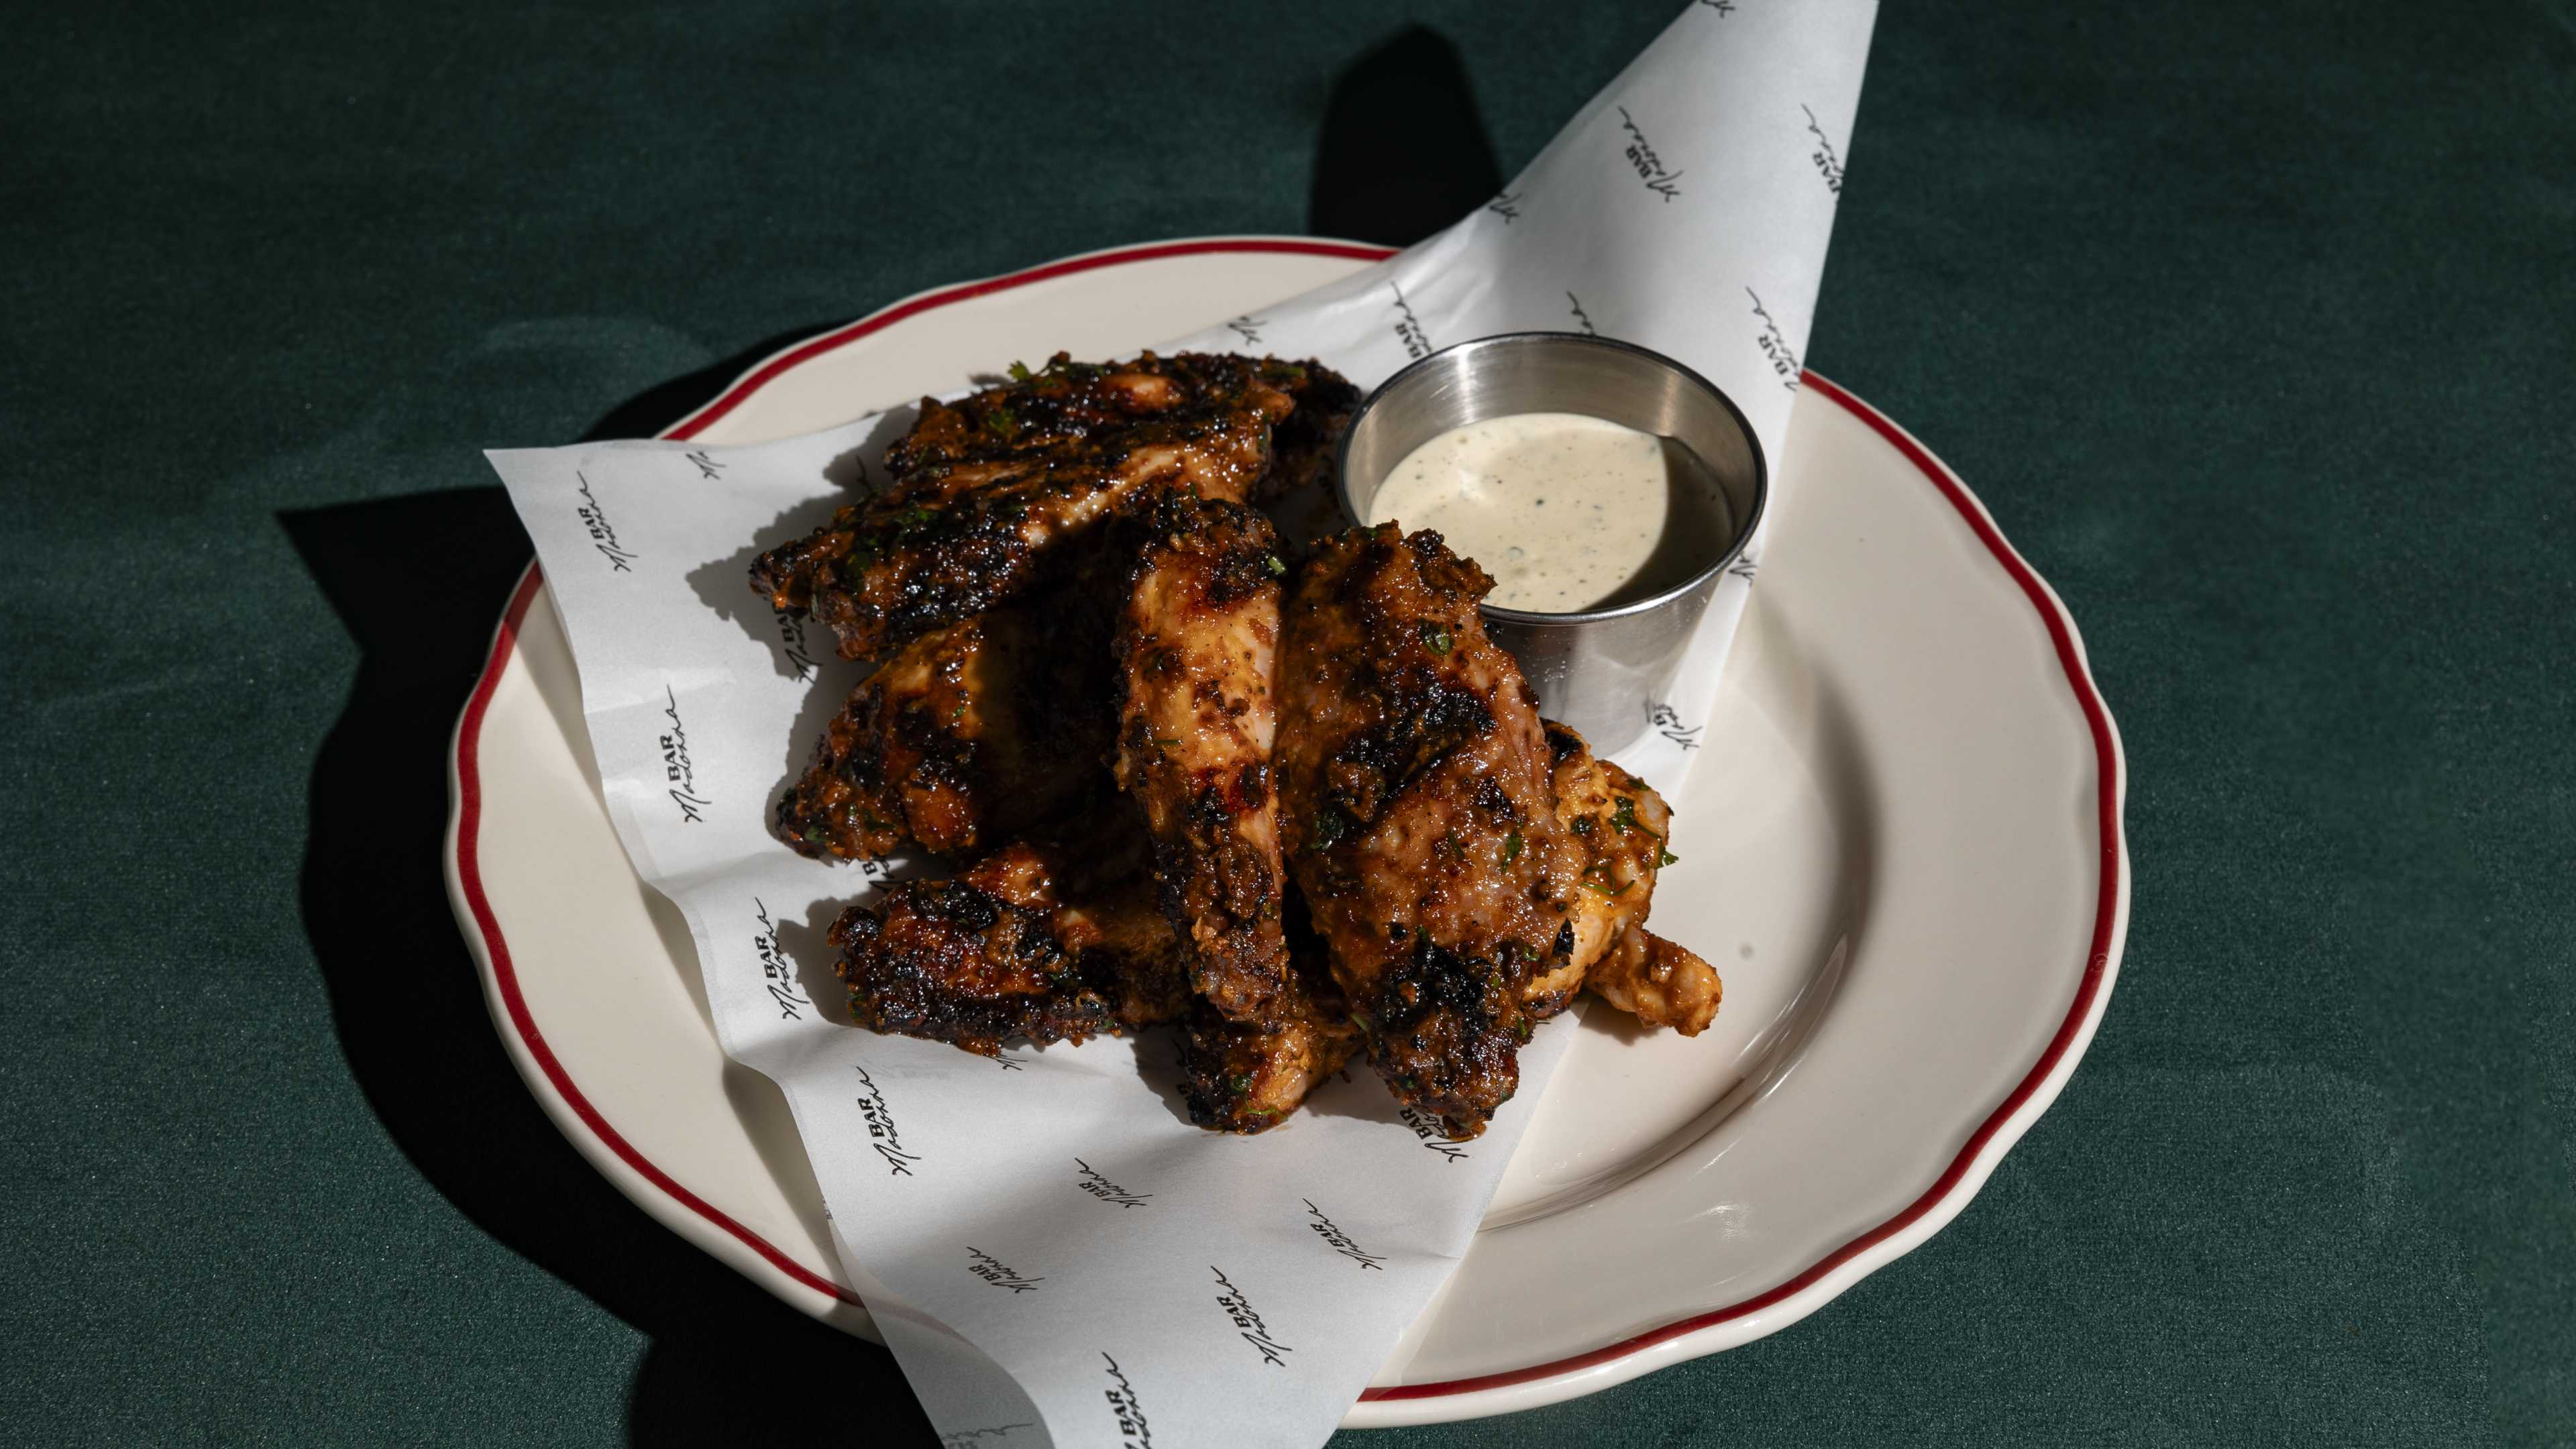 A plate of charred wings with a sauce on the side.